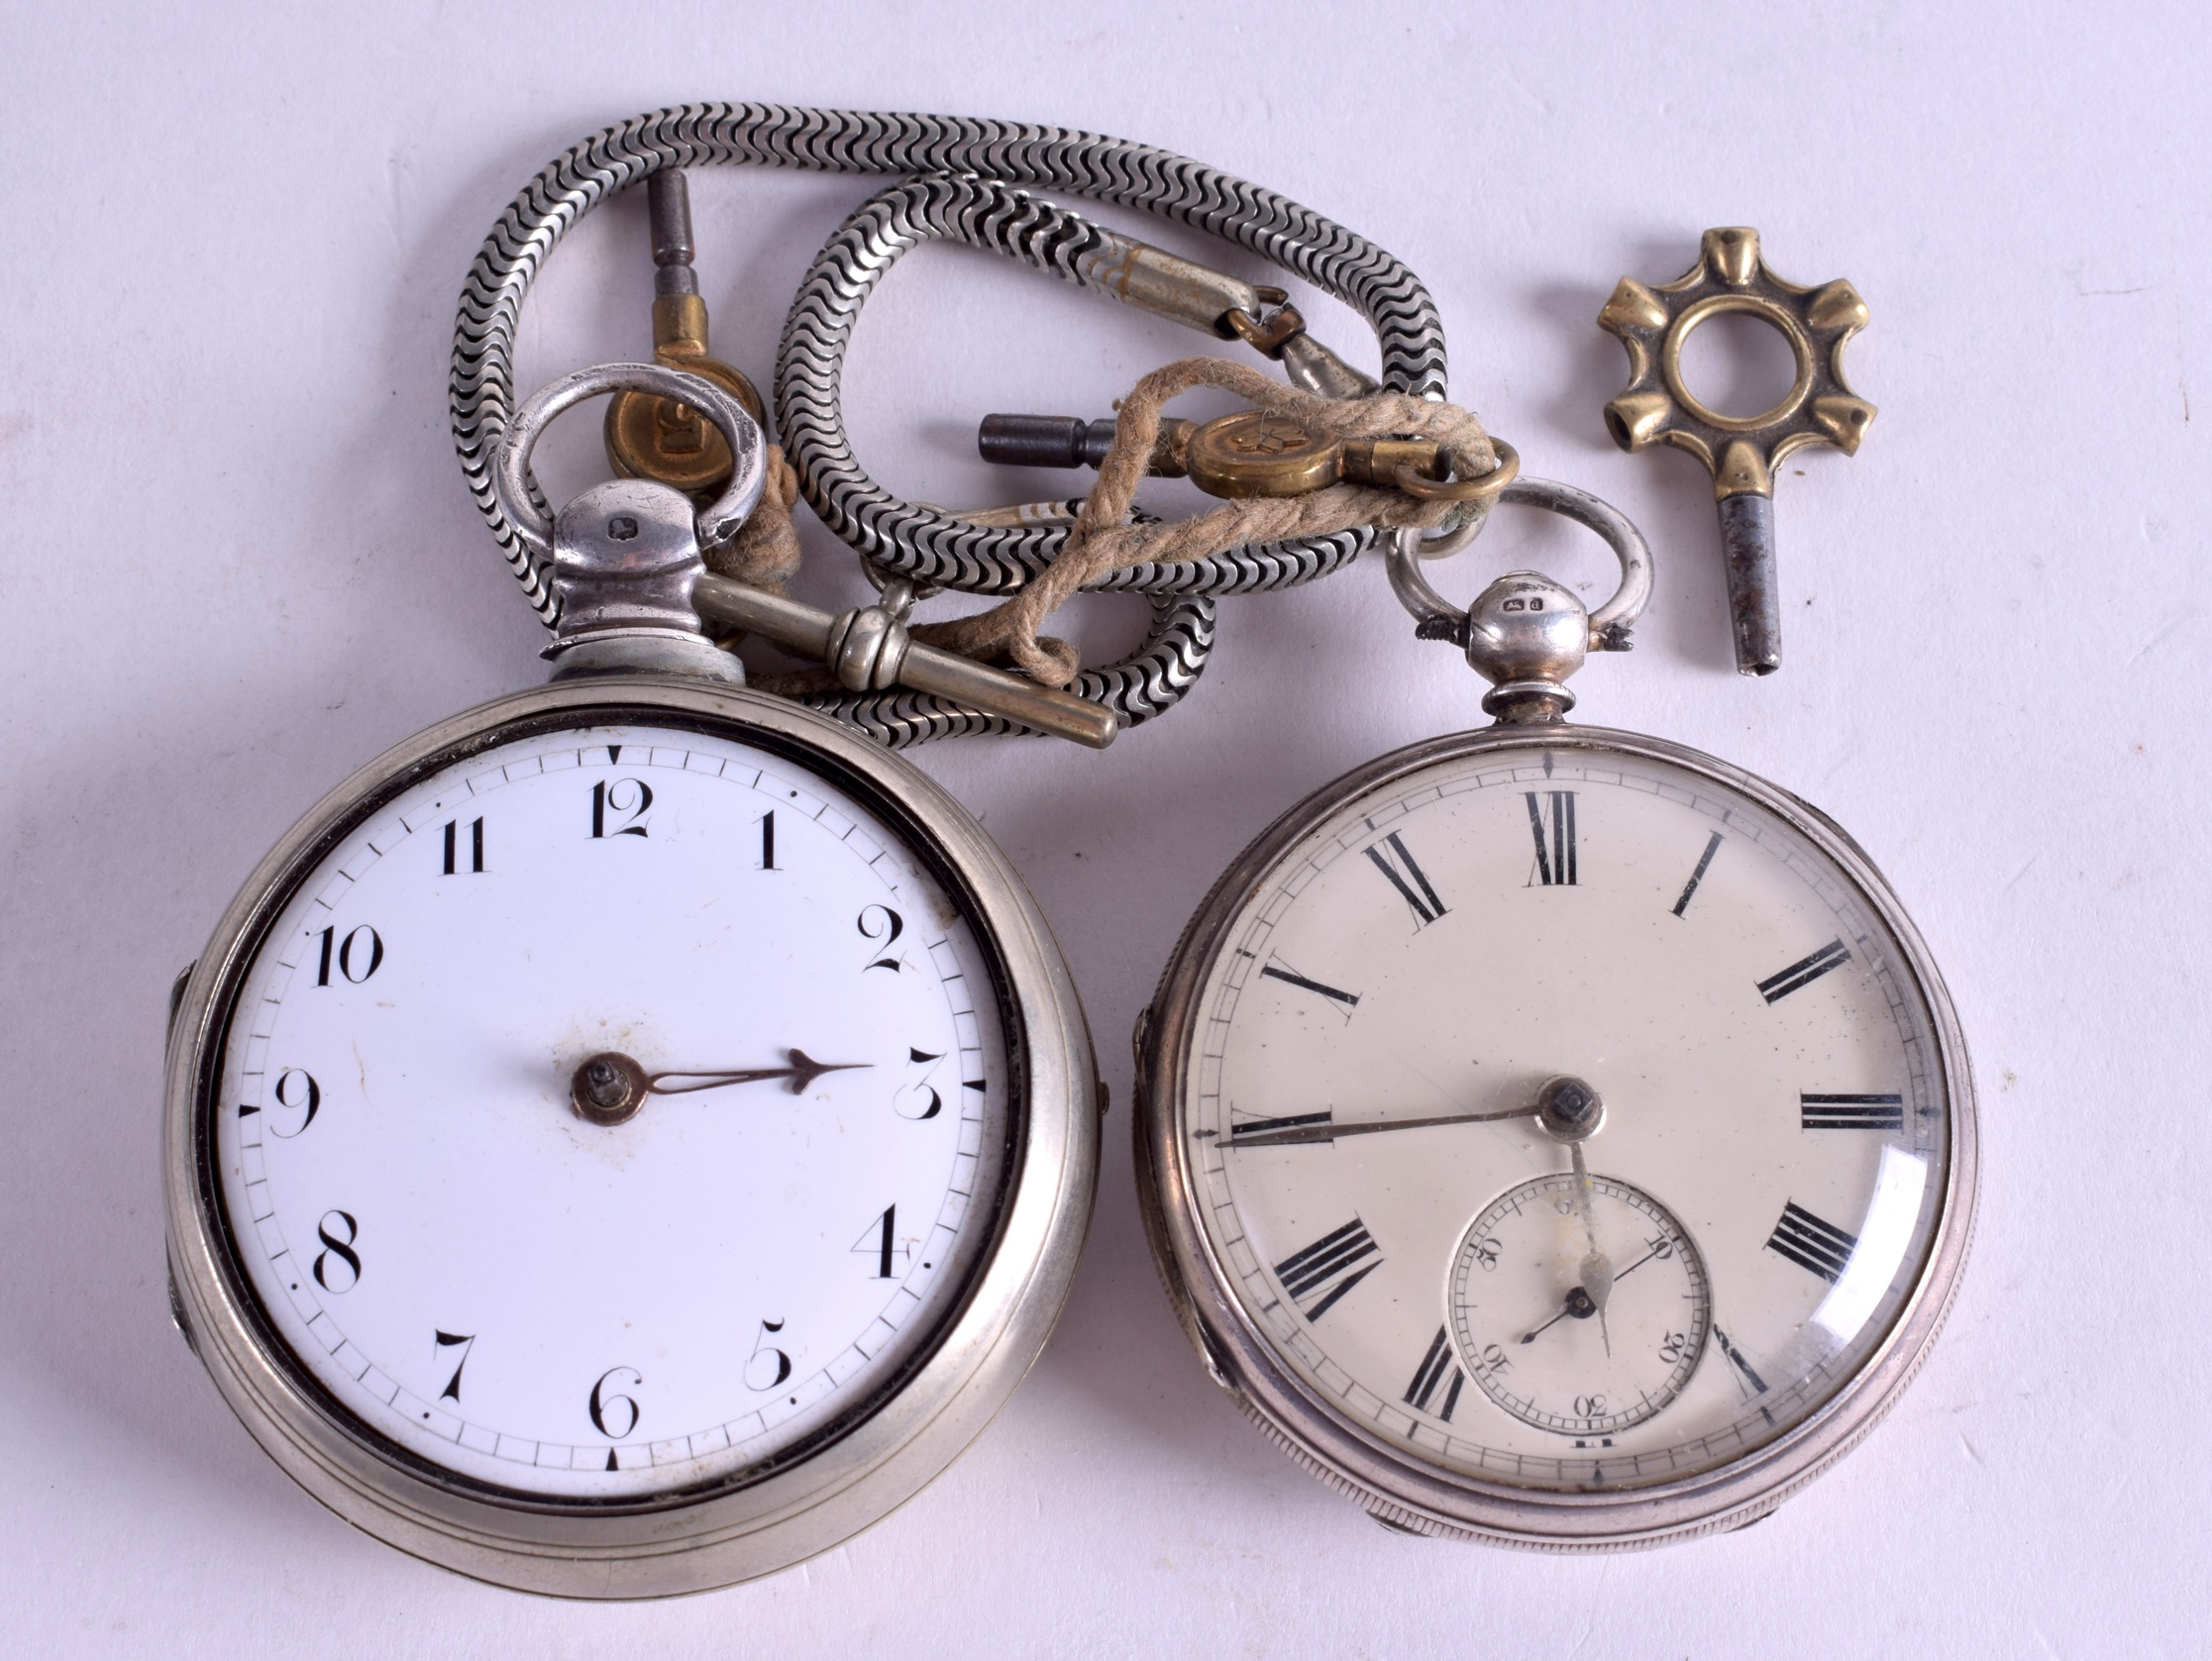 TWO ANTIQUE SILVER POCKET WATCHES. (2)